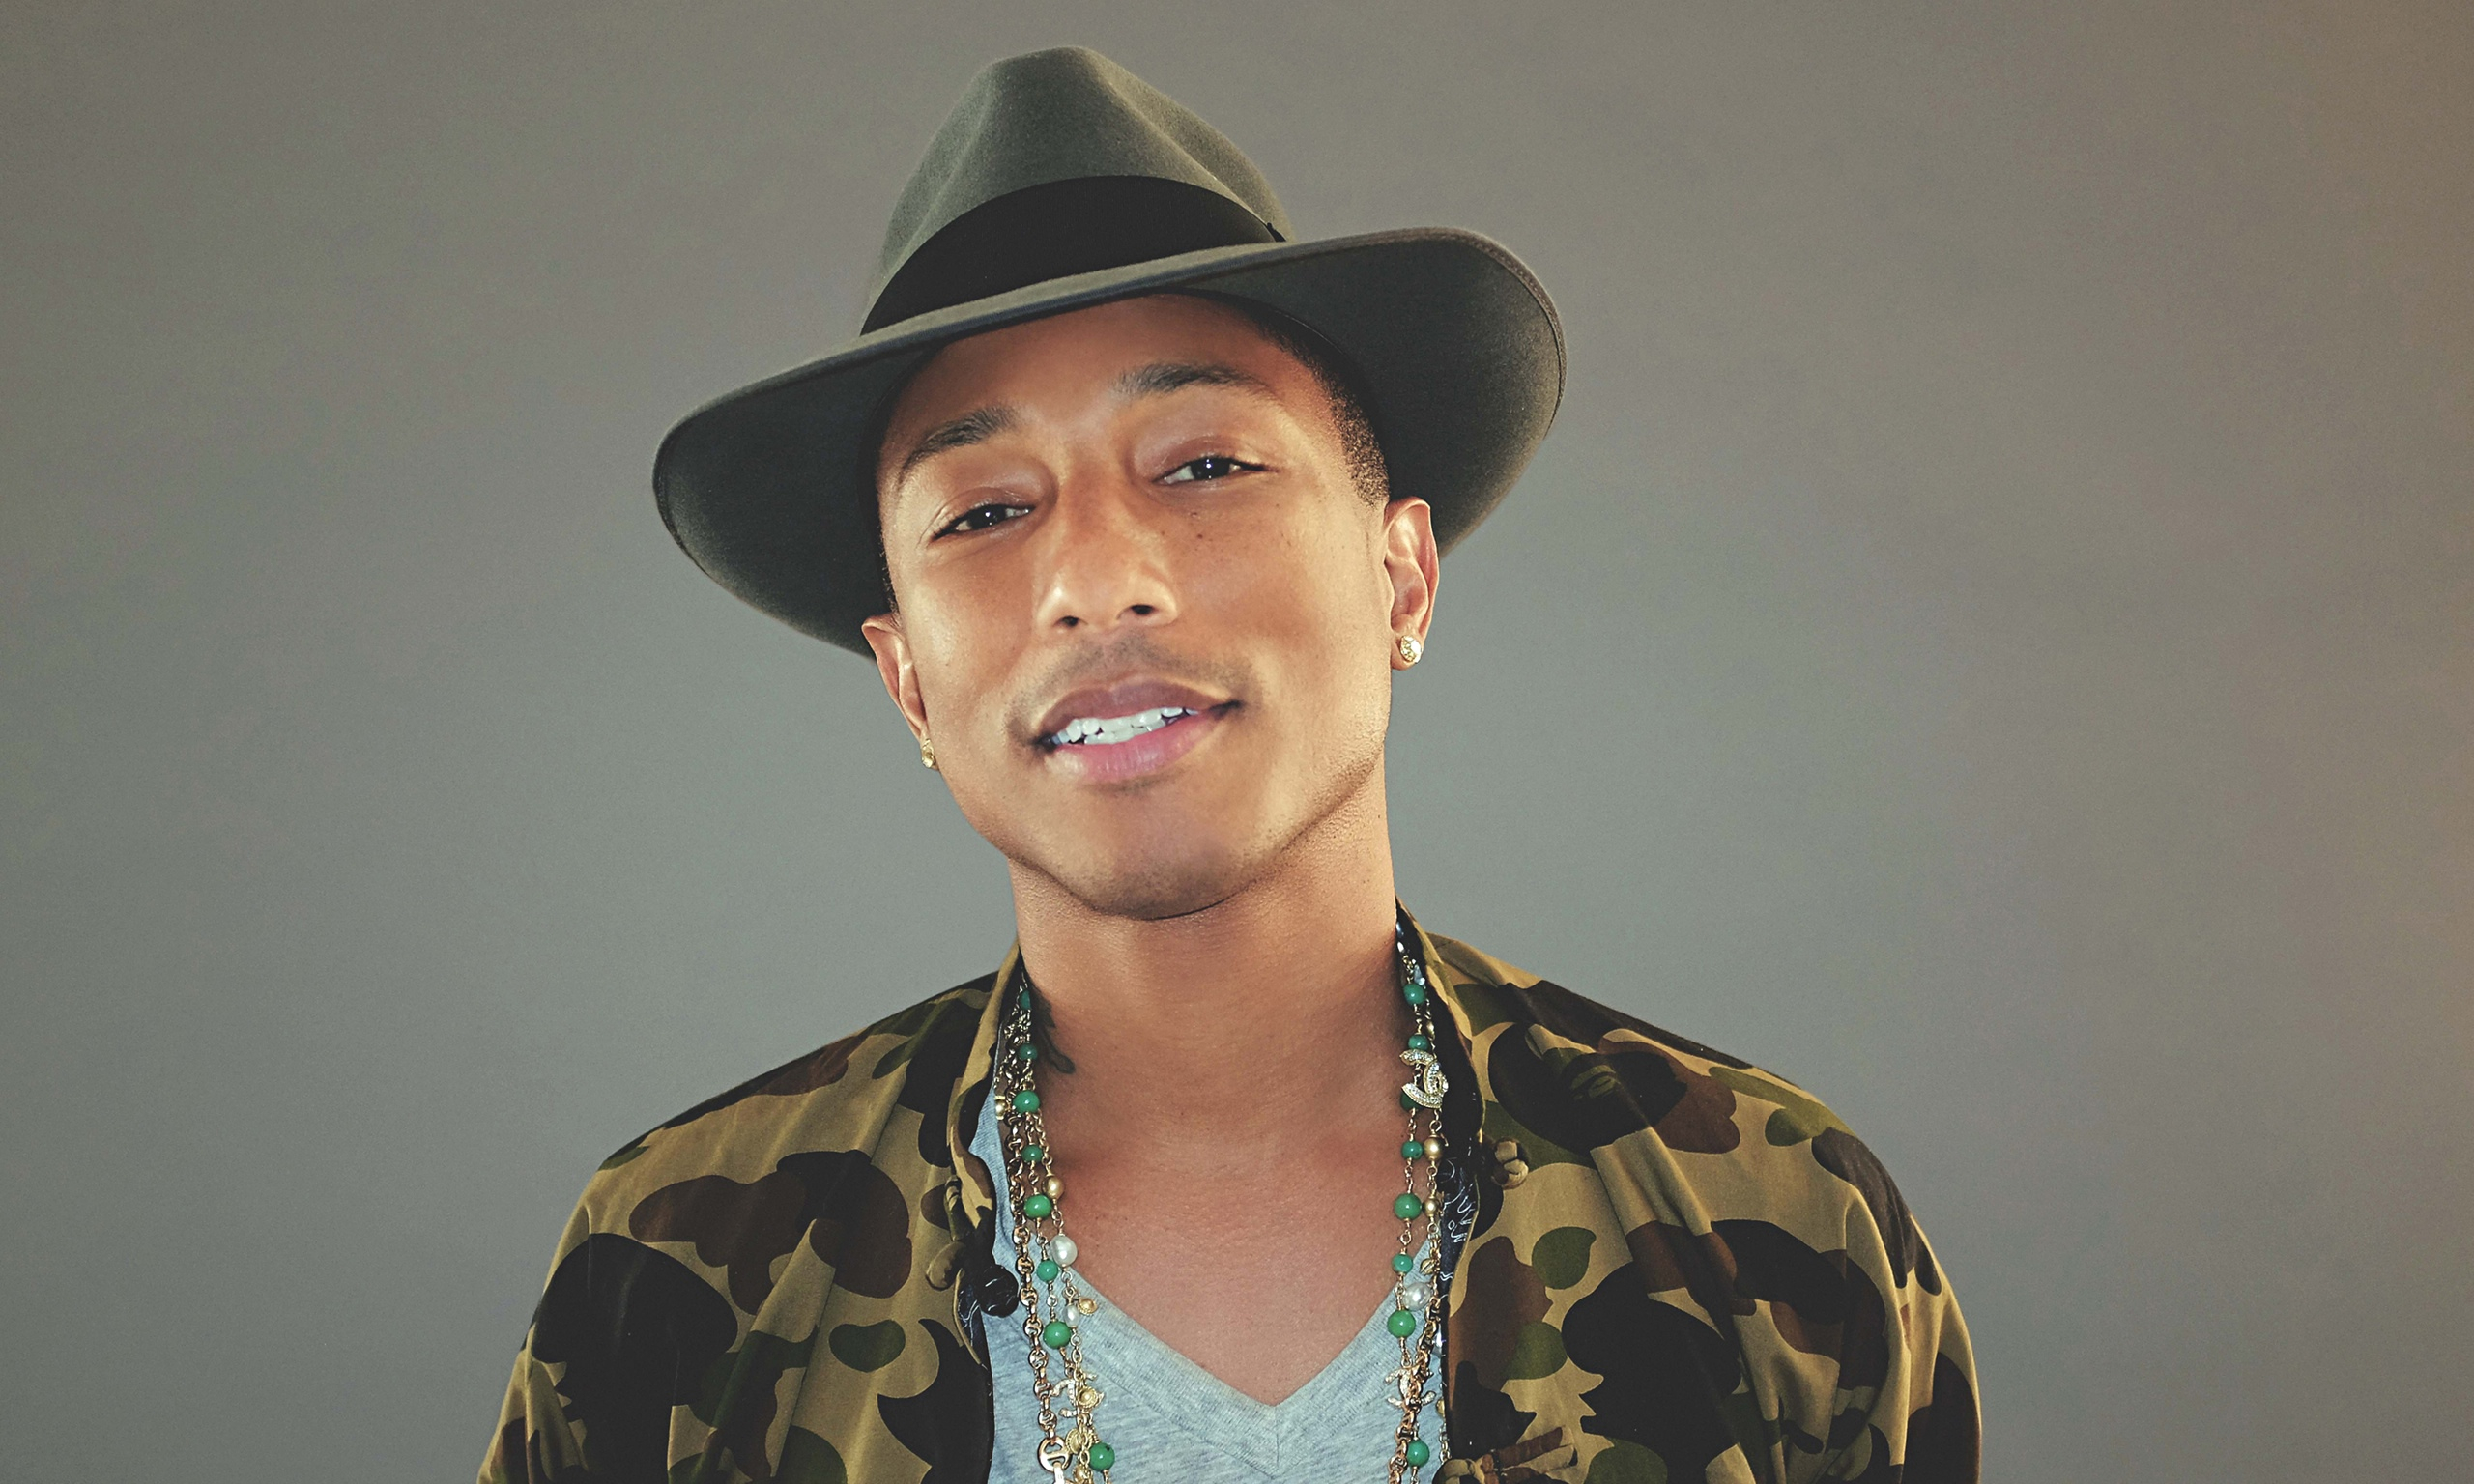 2560x1536 Wallpaper : face, portrait, hat, Rapper, hair, Person, clothing, singing, hairstyle, pharrell williams wallpaperUp 560416 HD Wallpapers